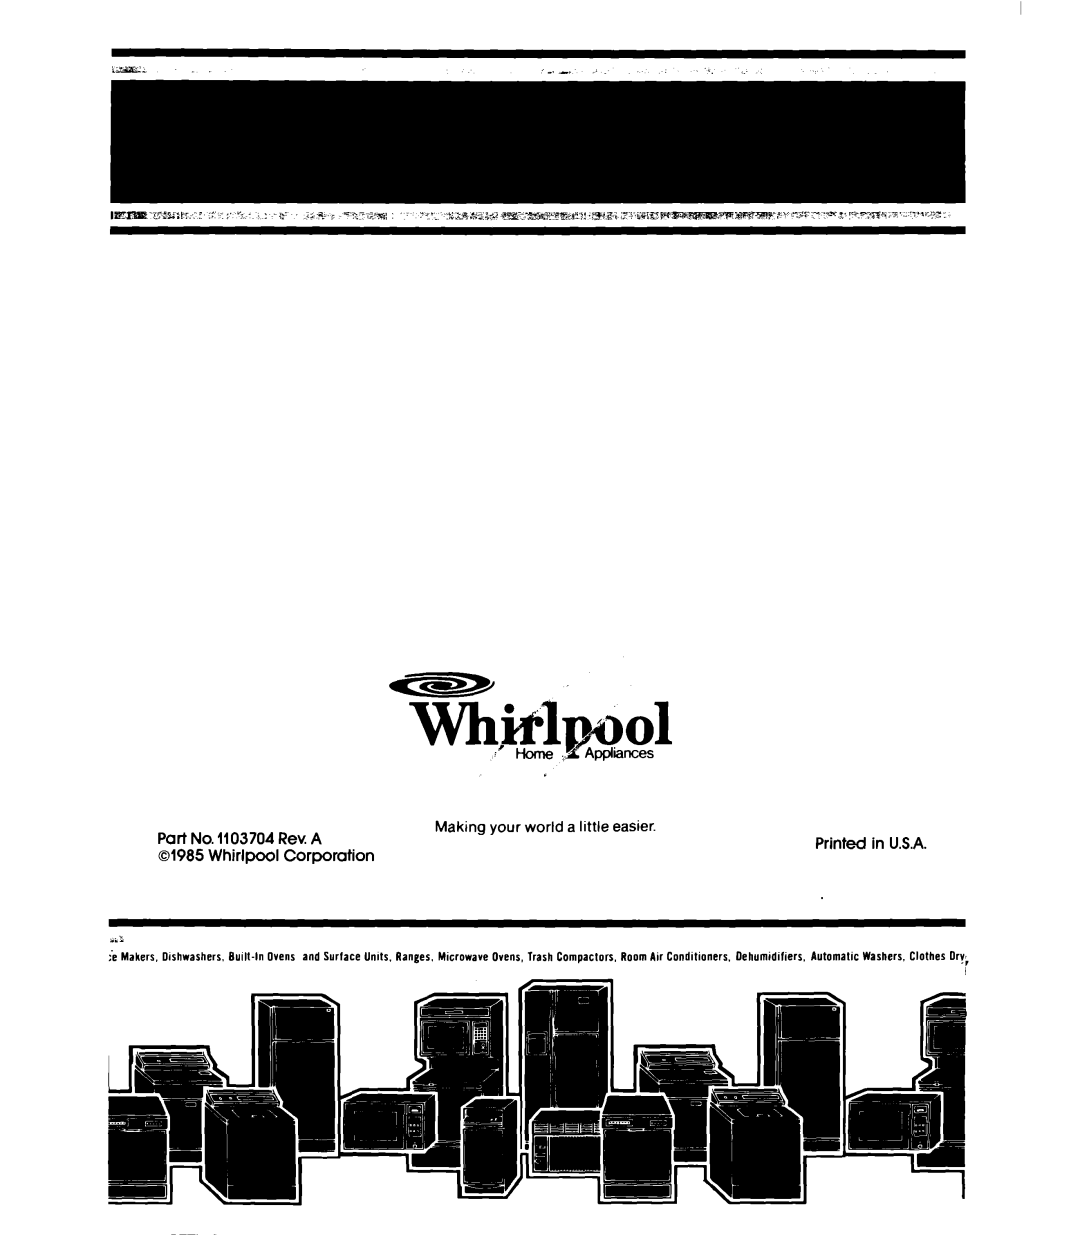 Whirlpool EVIIOCXR manual Part No. 1103704 Rev. A, Whirlpool Corporation, Making your world a little easier 